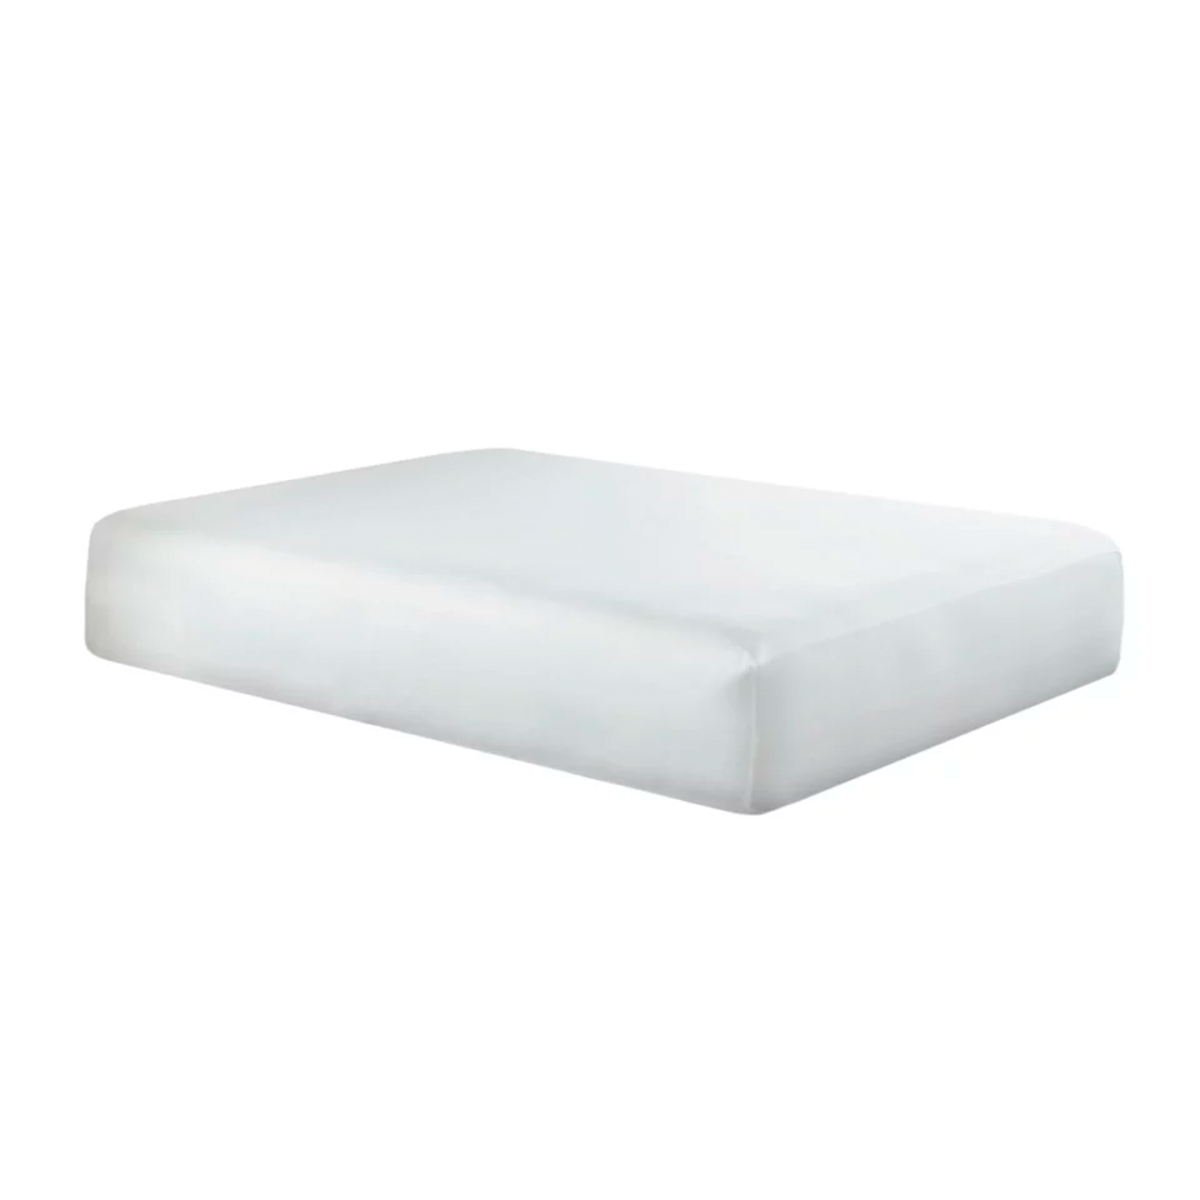 omniguard advance antimicrobial silver mattress protector by purecare white background